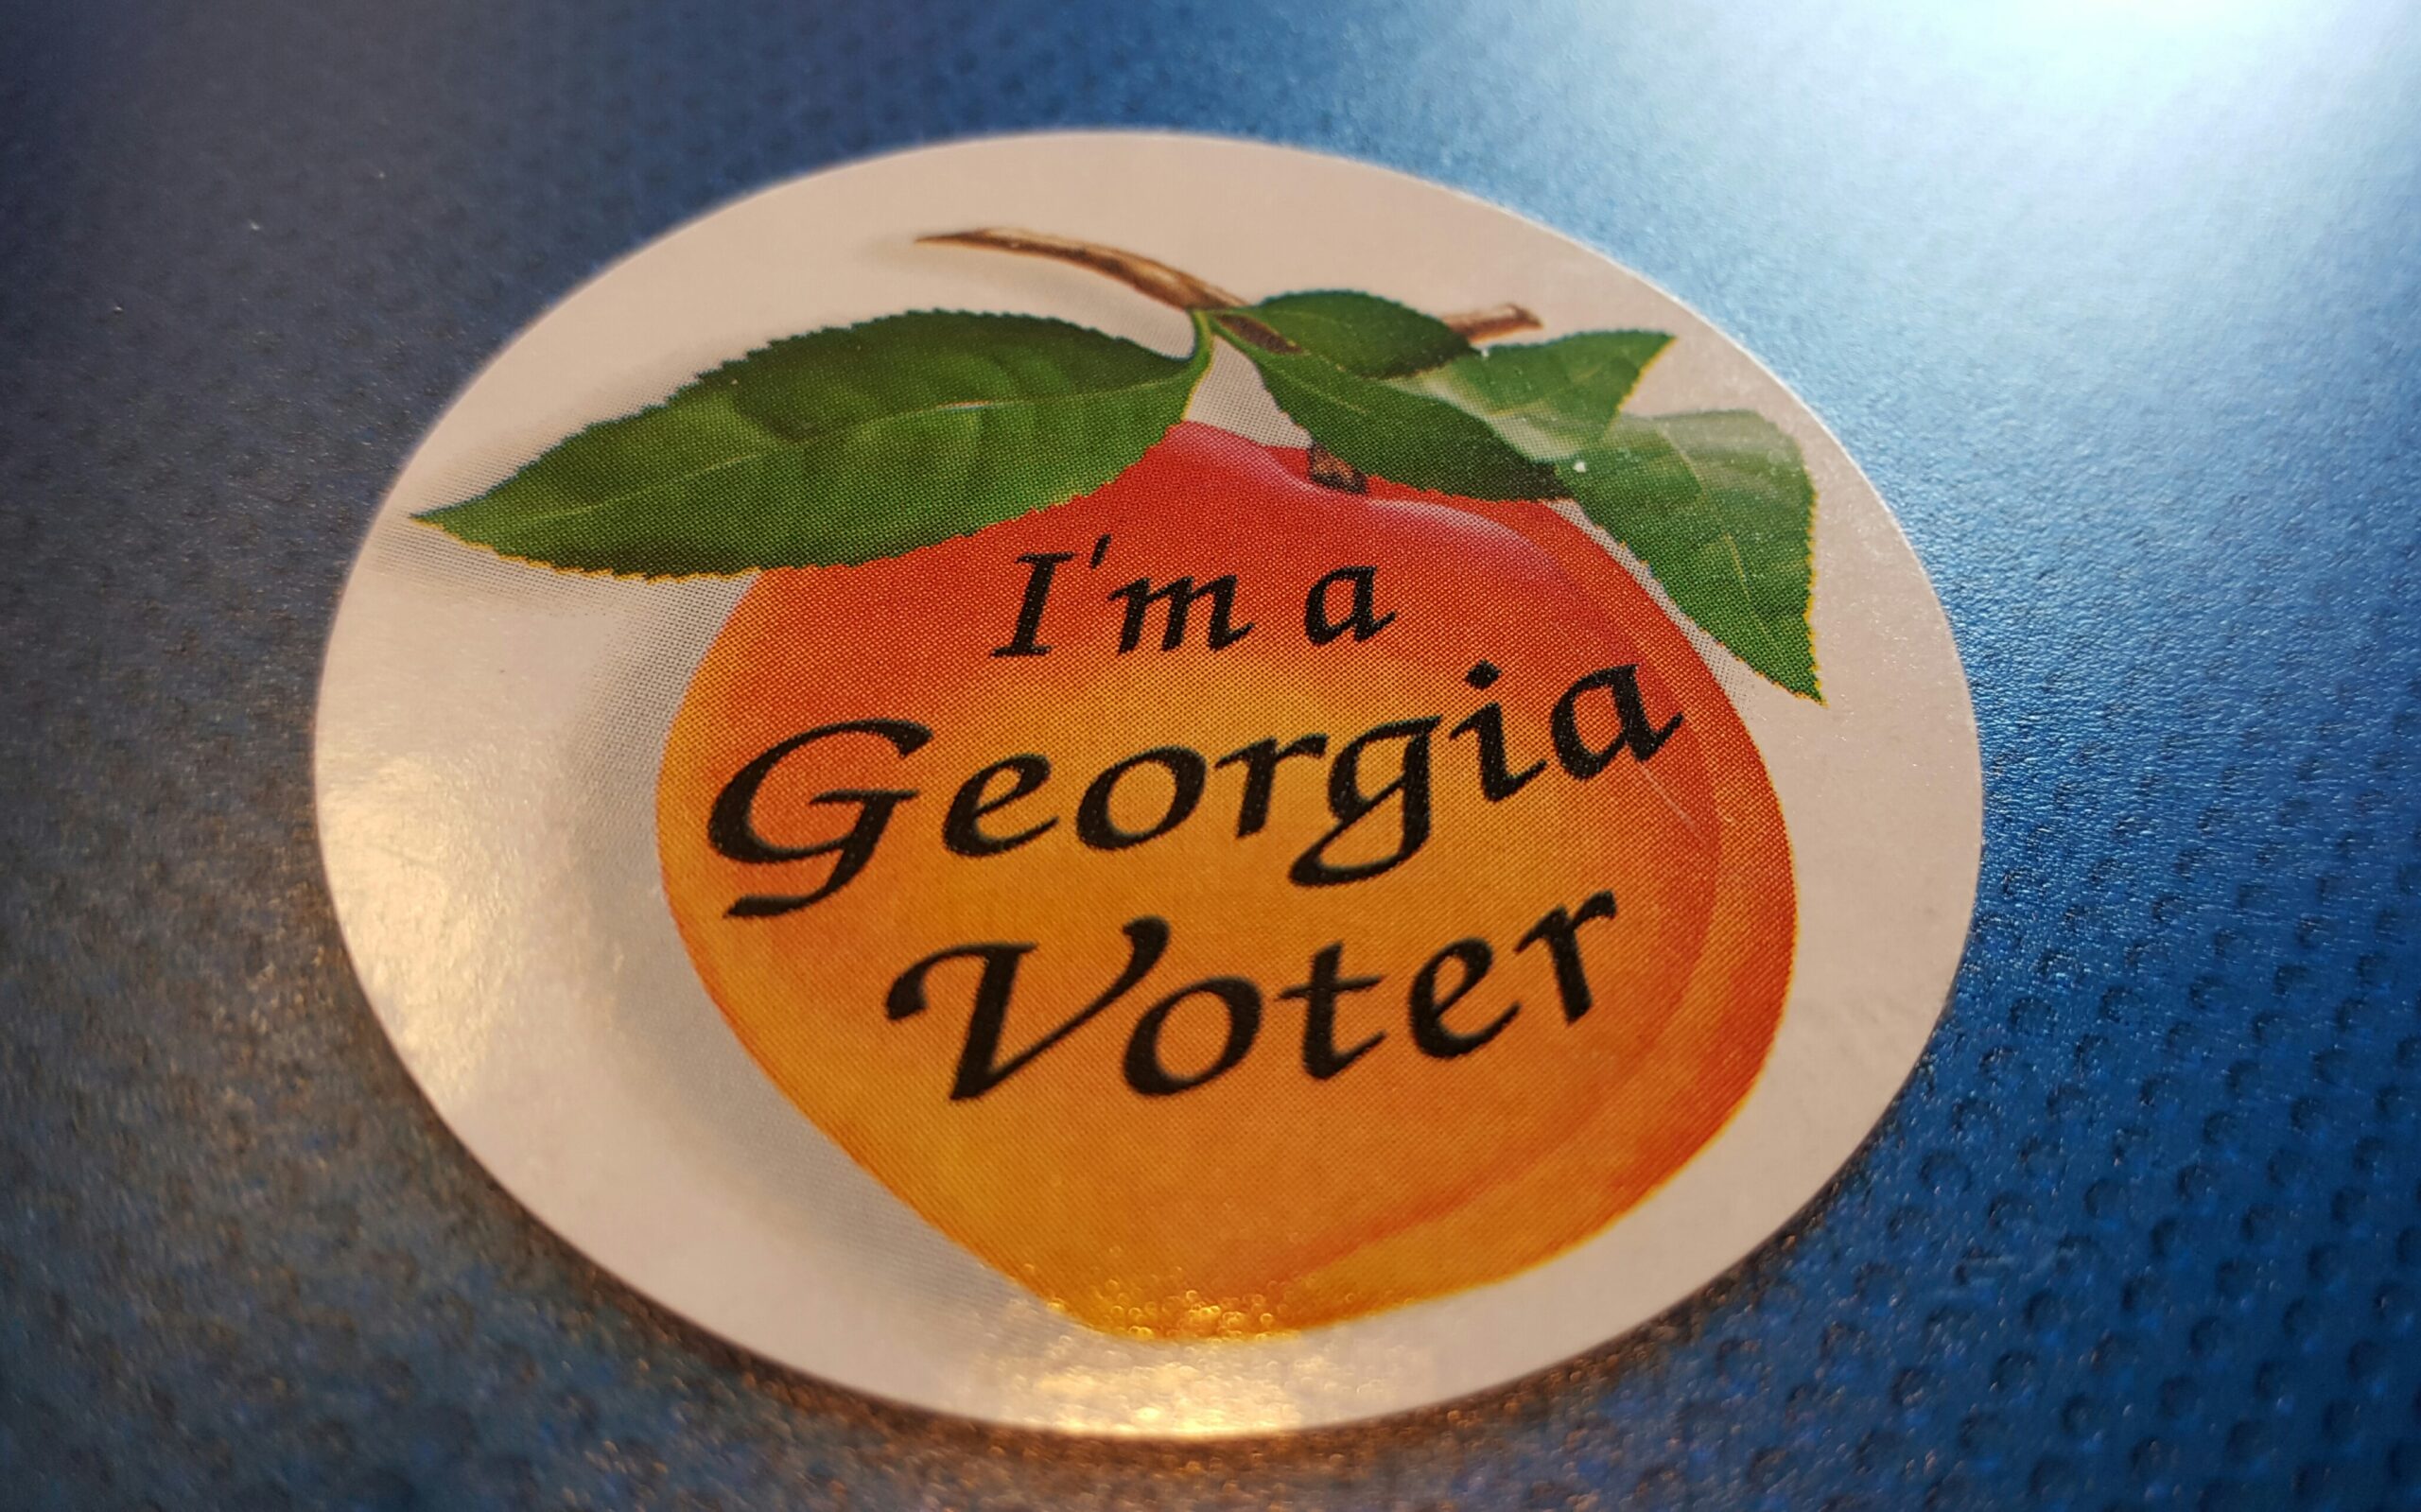 Georgia voters to vote on four proposed constitutional amendments